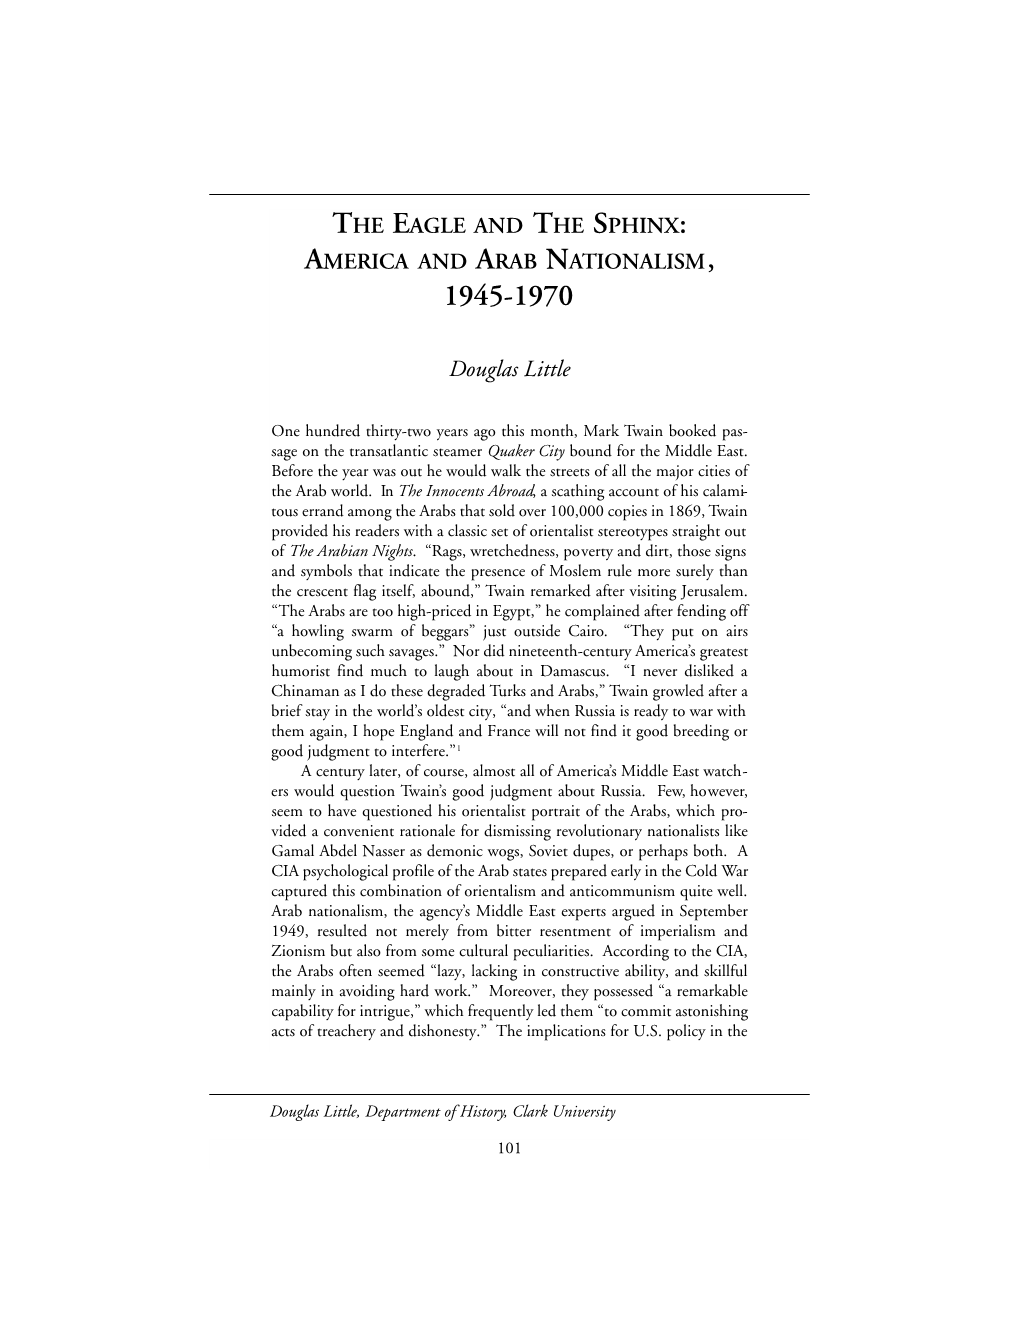 The Eagle and the Sphinx: America and Arab Nationalism, 1945-1970